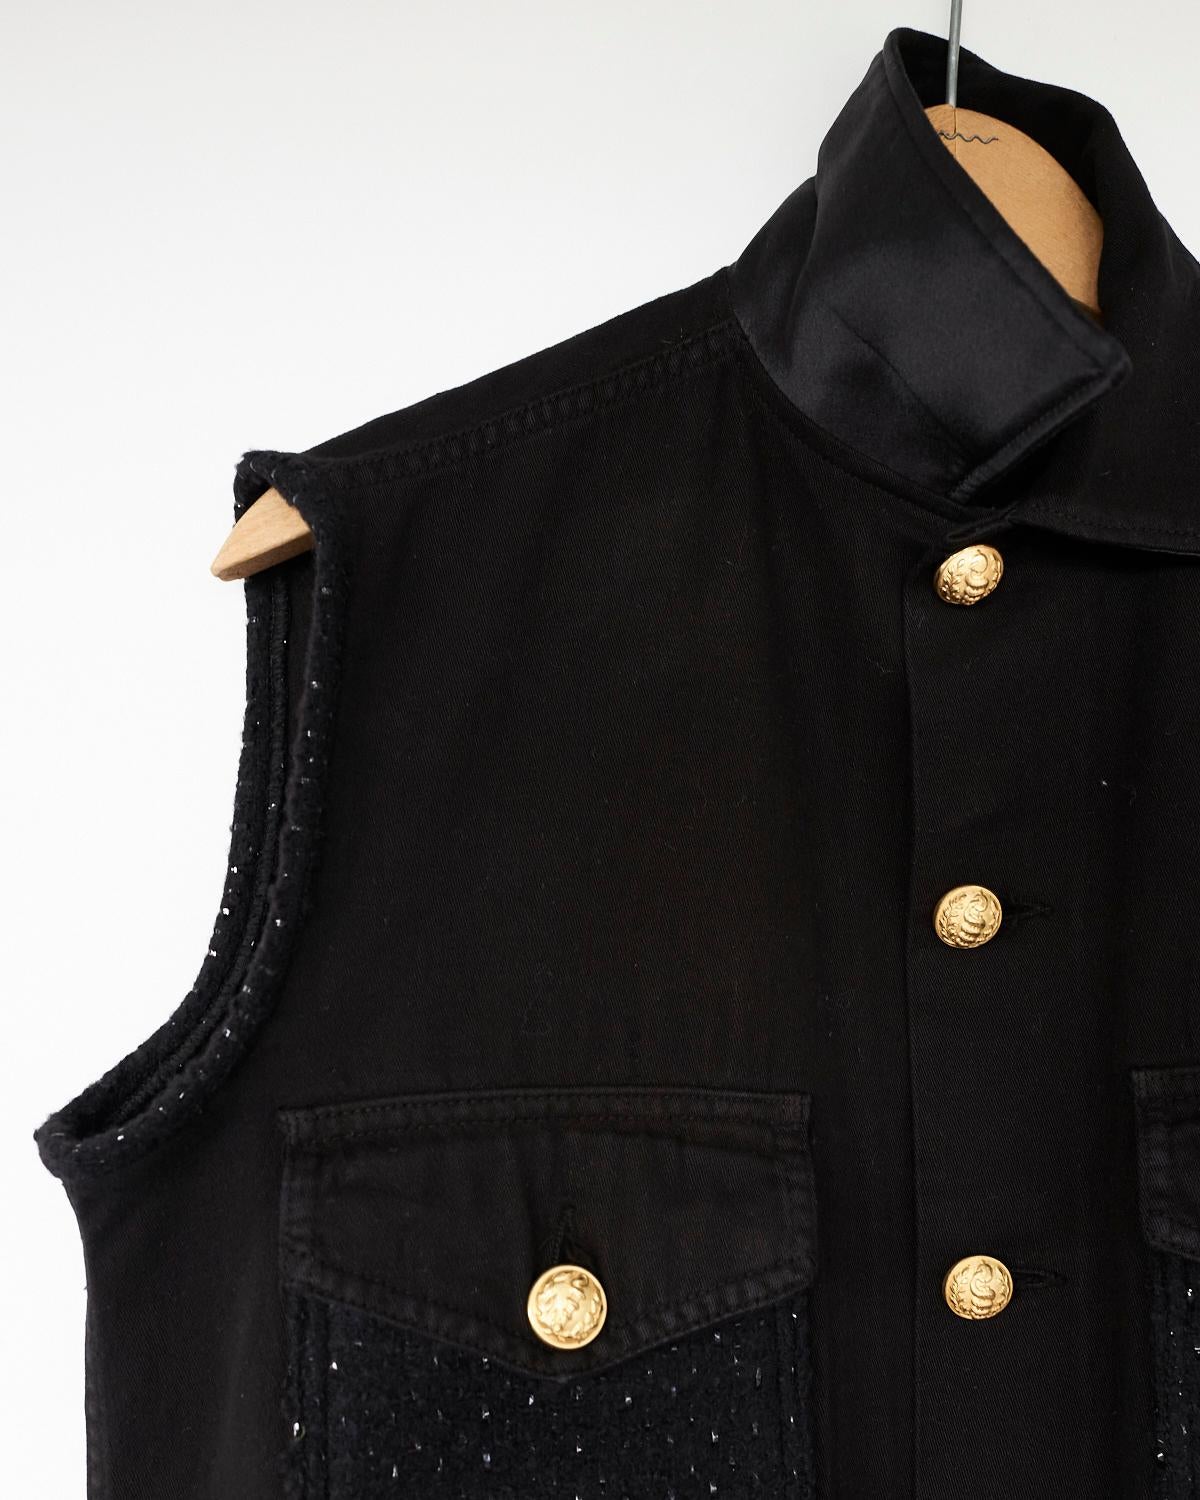 Embellished Sleeveless Wool Tweed Cropped MilitaryJacket Black French Gold Buttons J Dauphin 
Brand: J Dauphin
Size: S/M
Sustainable Luxury, Collectible Vintage Re- Purposed

Our Up-cycled Vintage Jackets are made from vintage, natural fibers,